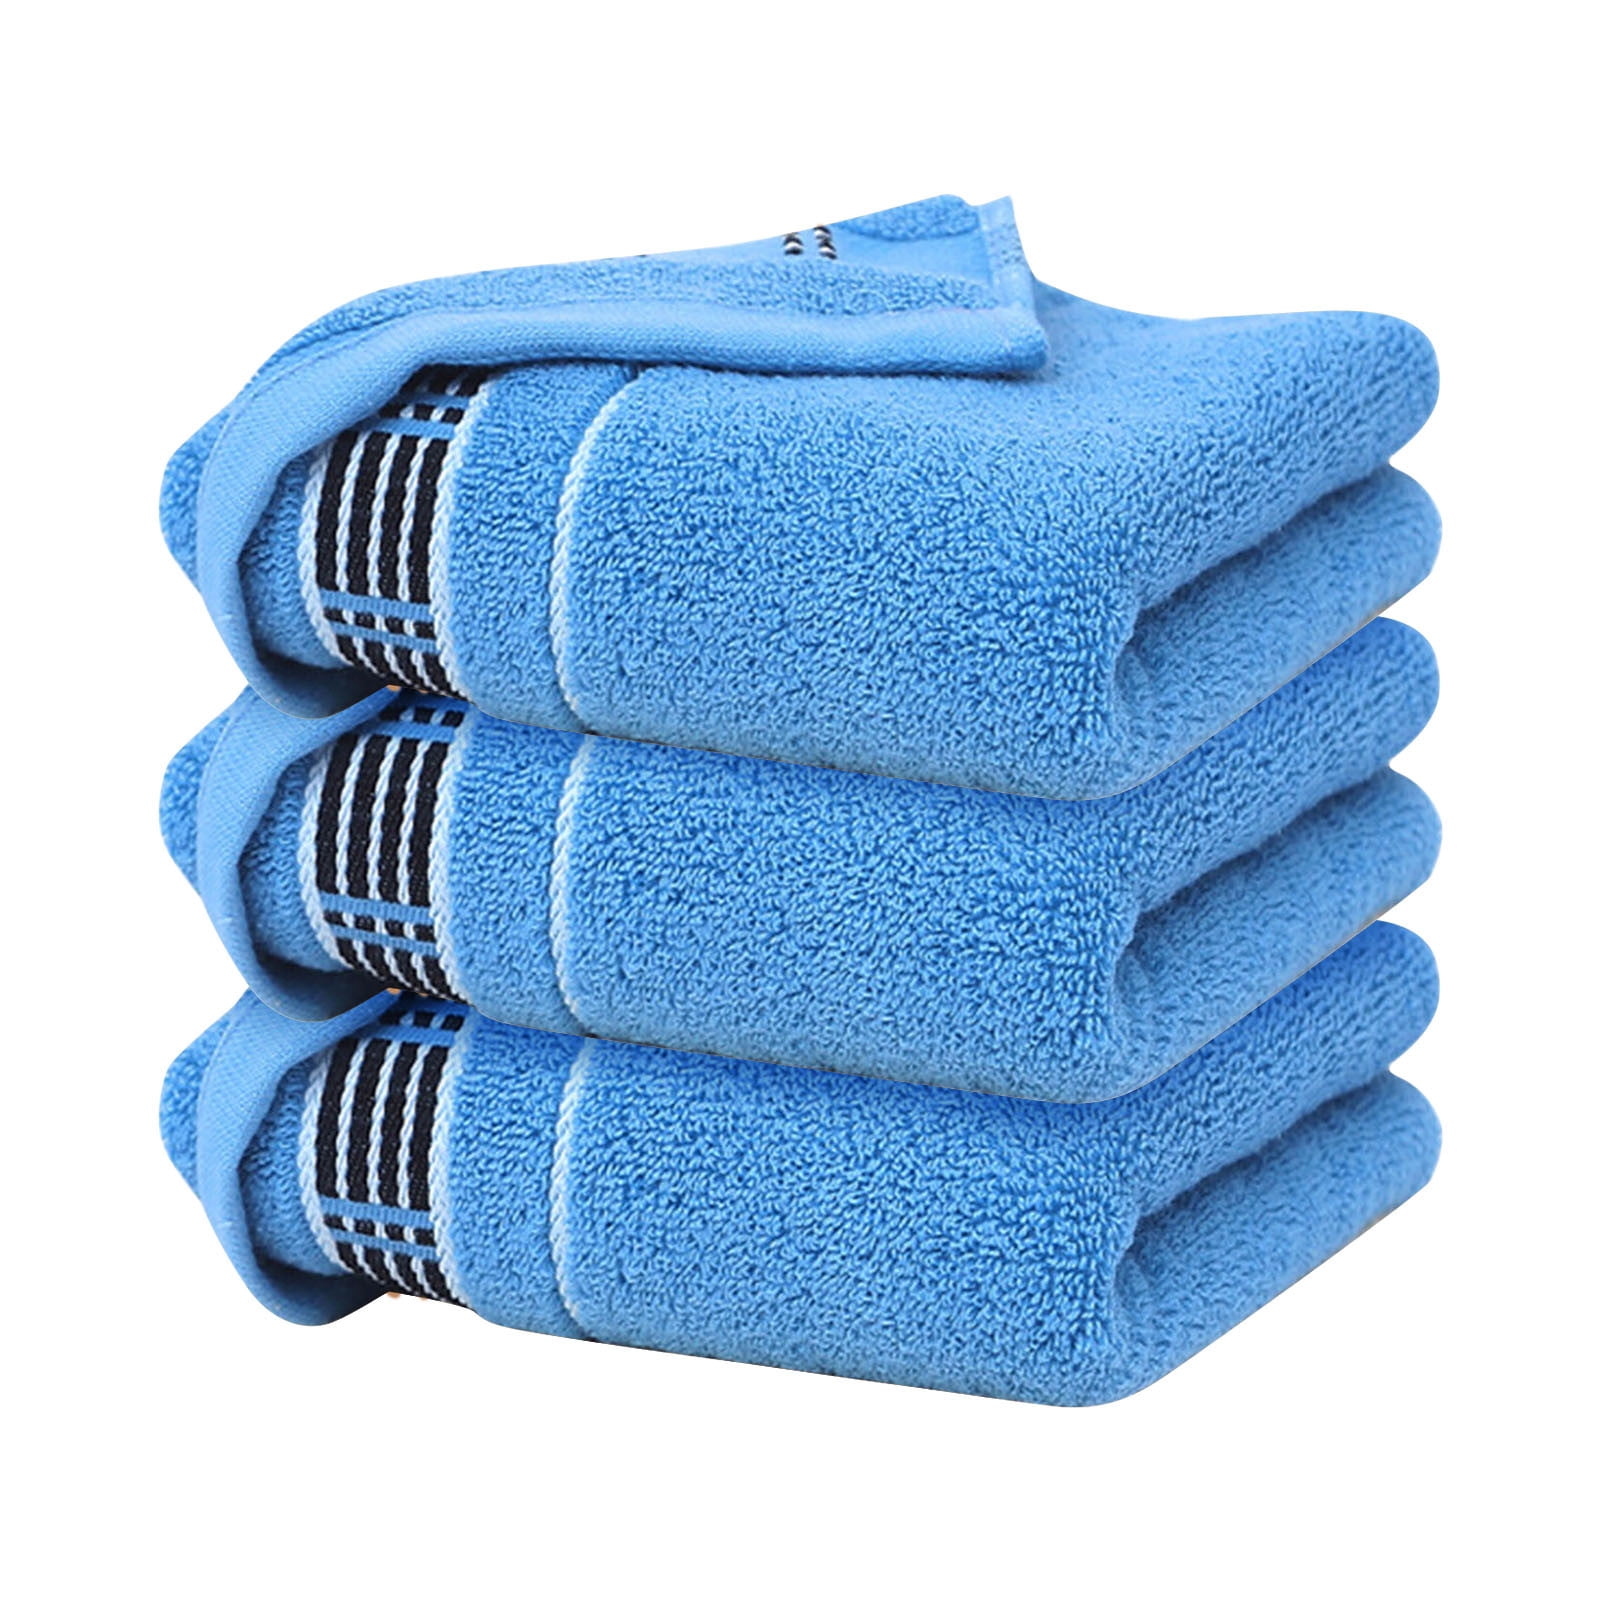 Pack of 3 Cotton Bath Towels 13x30 Inch Super Absorbent For Pool Spa Utopia  Towels 